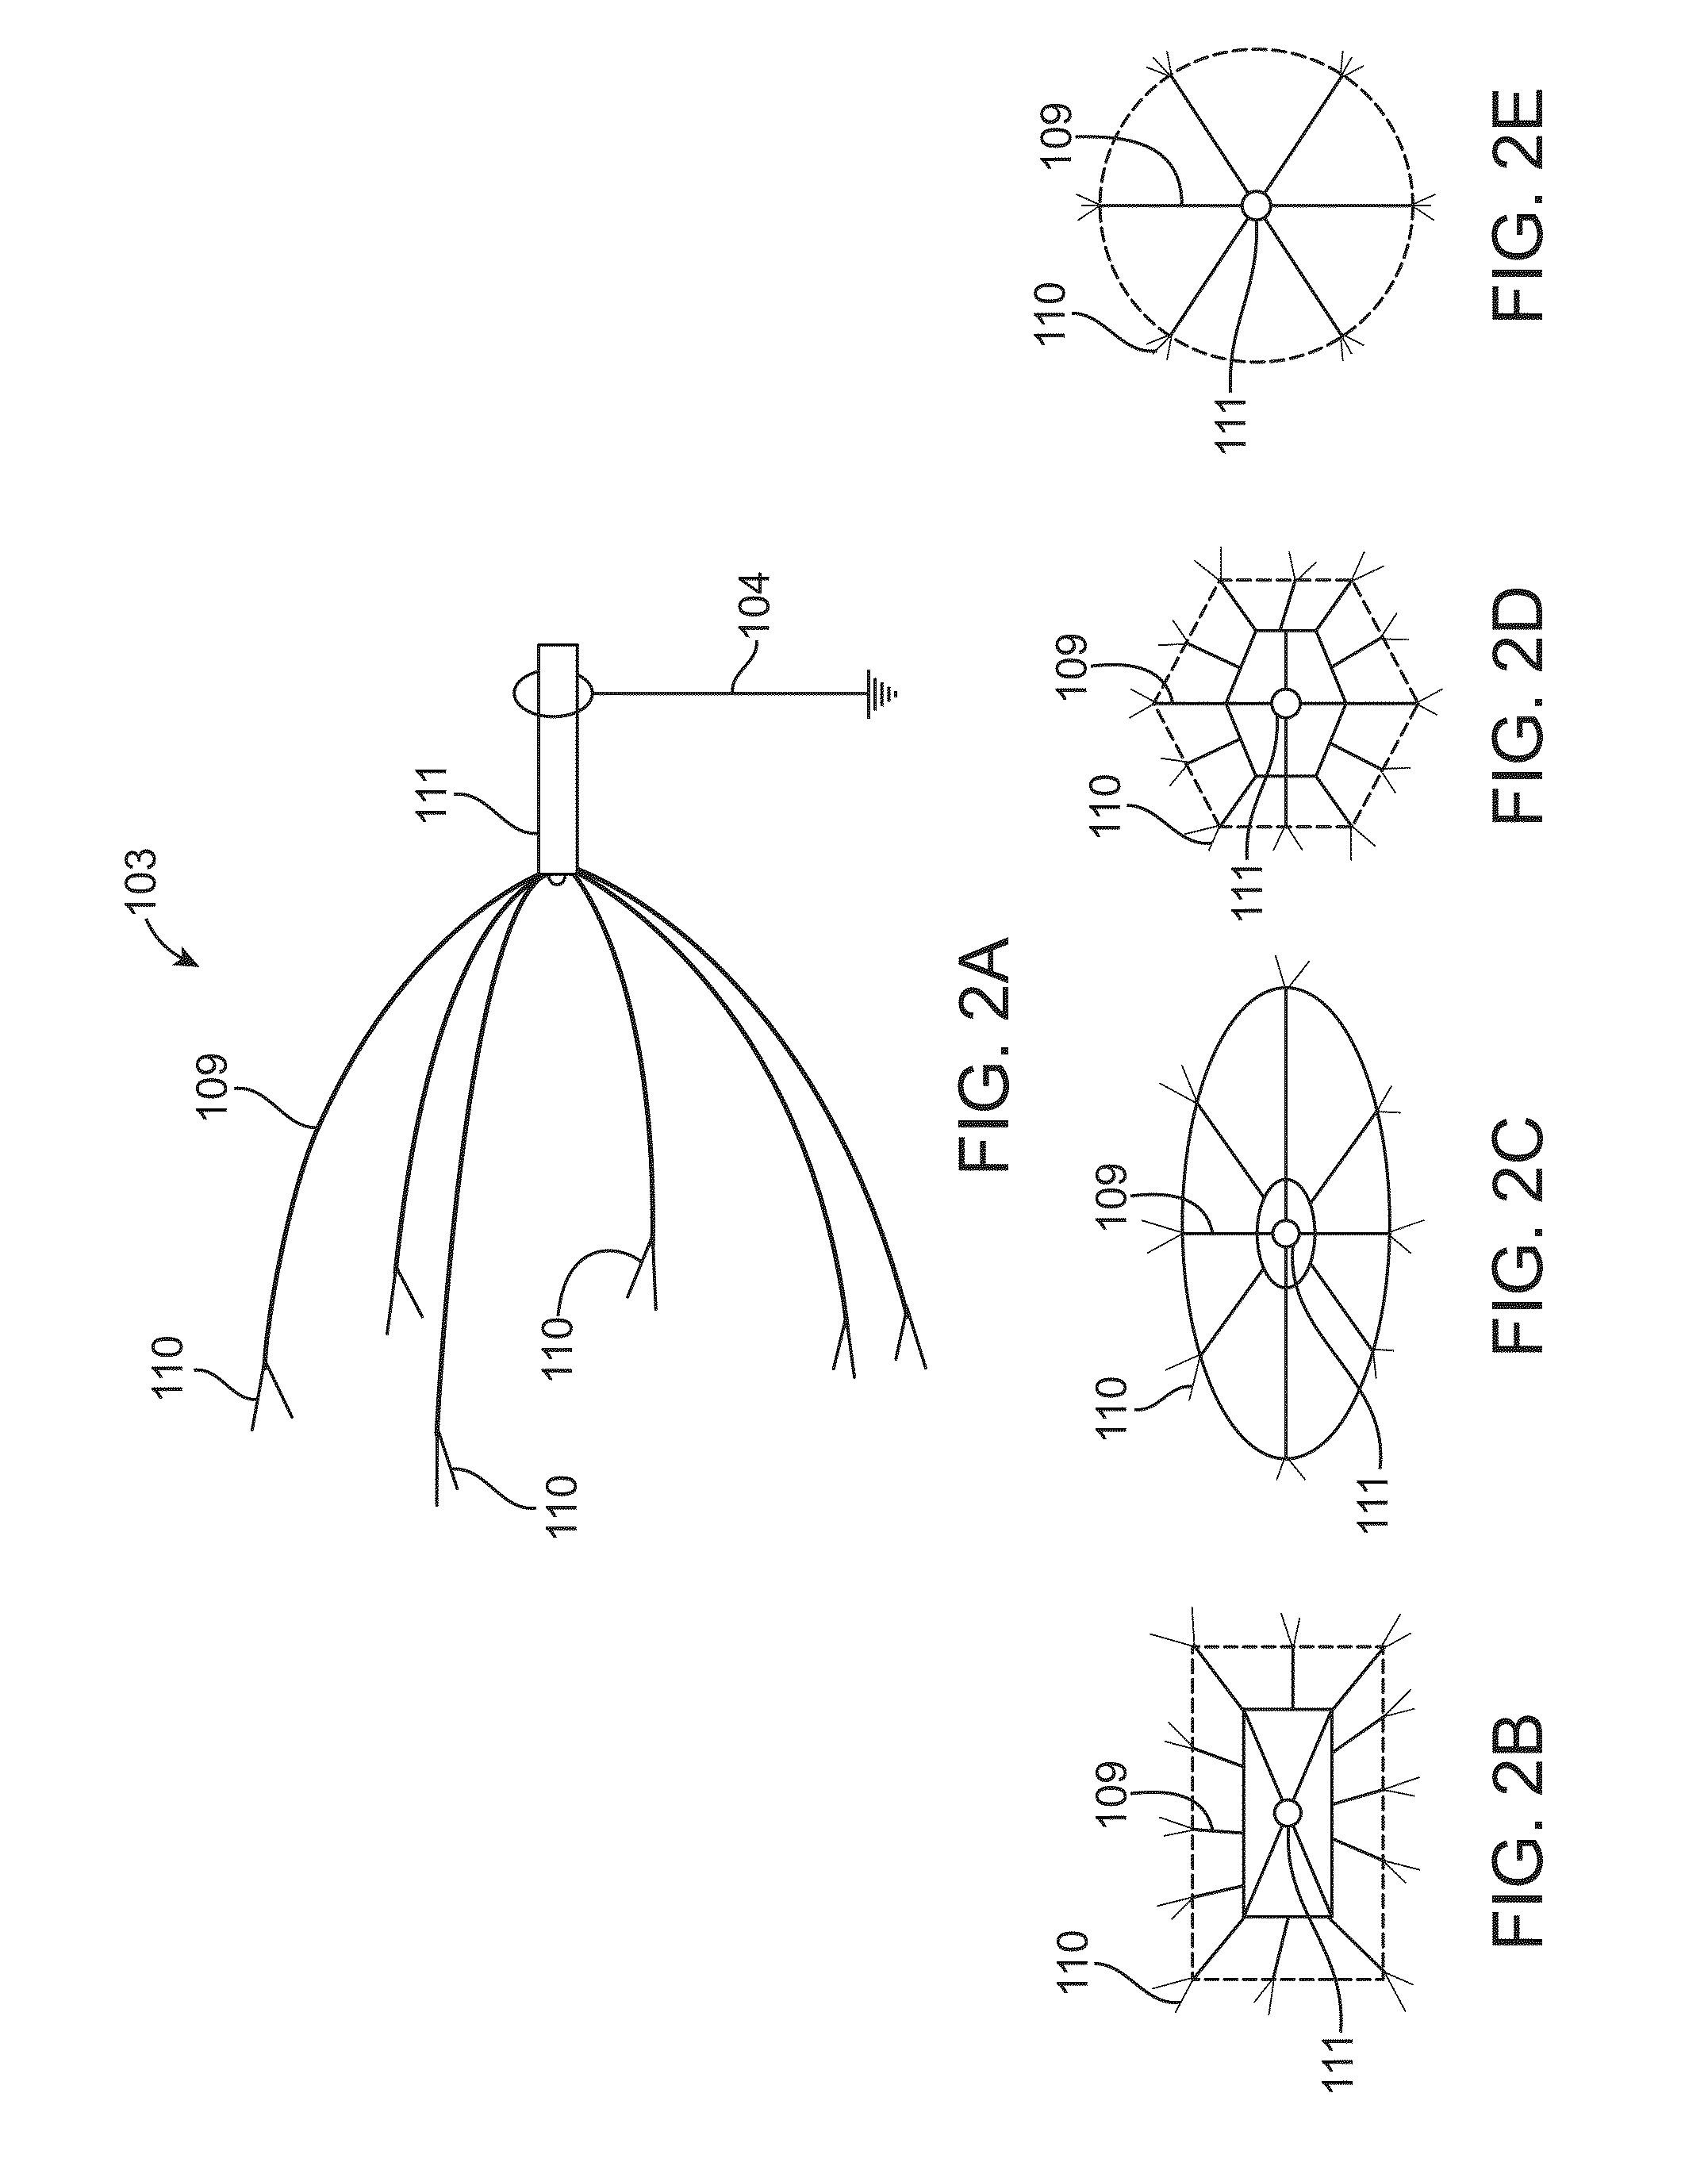 Electrospinning apparatus and method for producing multi-dimensional structures and core-sheath yarns